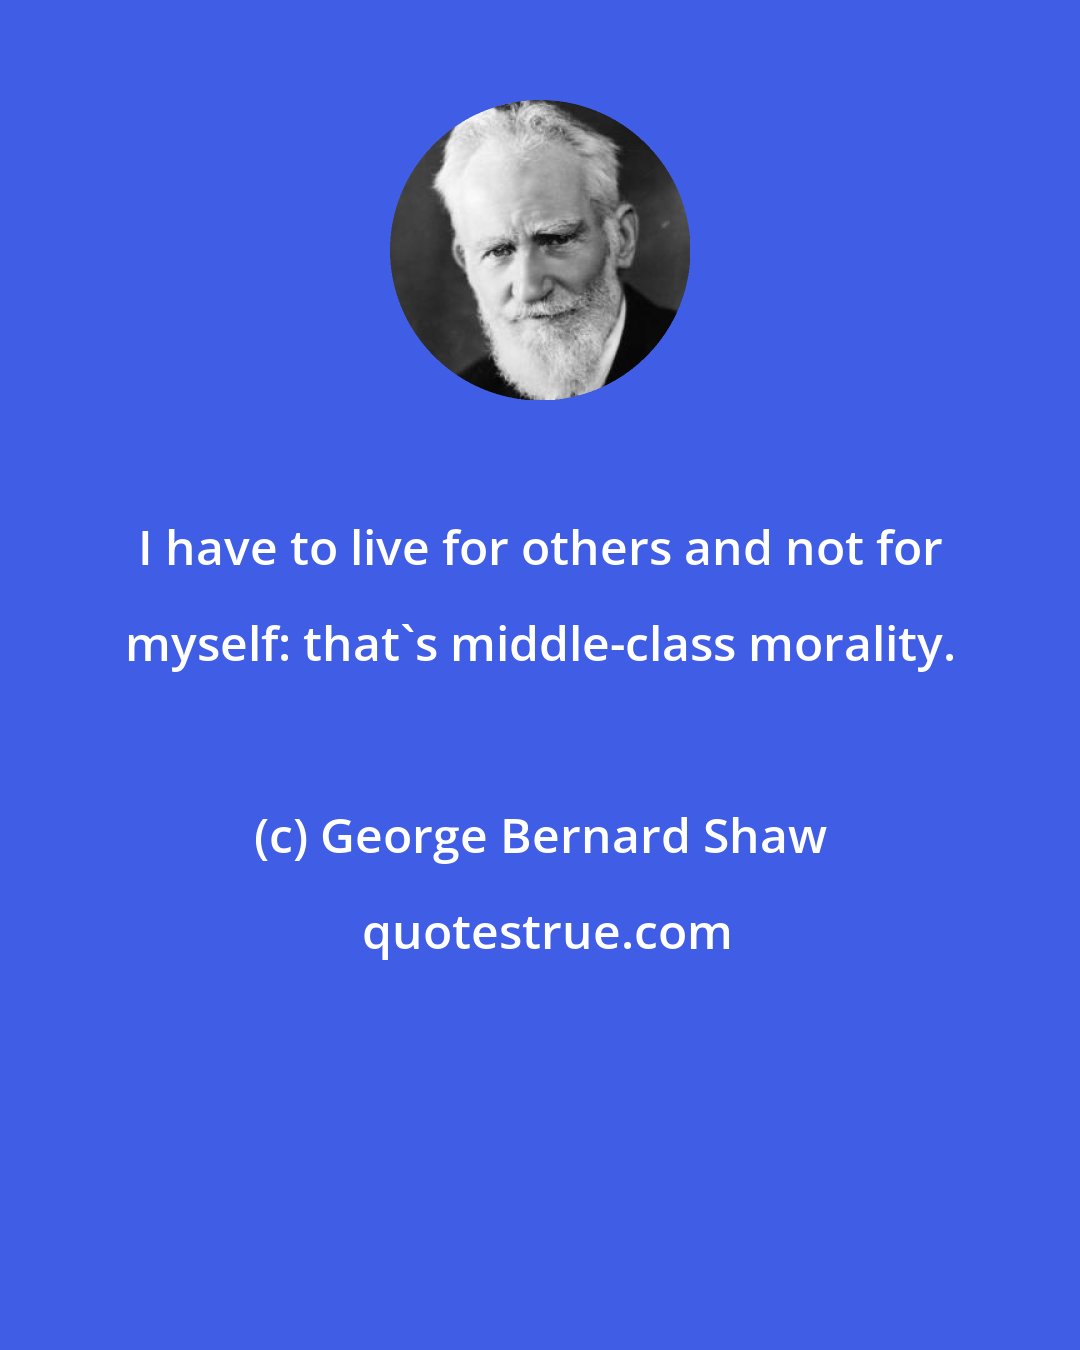 George Bernard Shaw: I have to live for others and not for myself: that's middle-class morality.